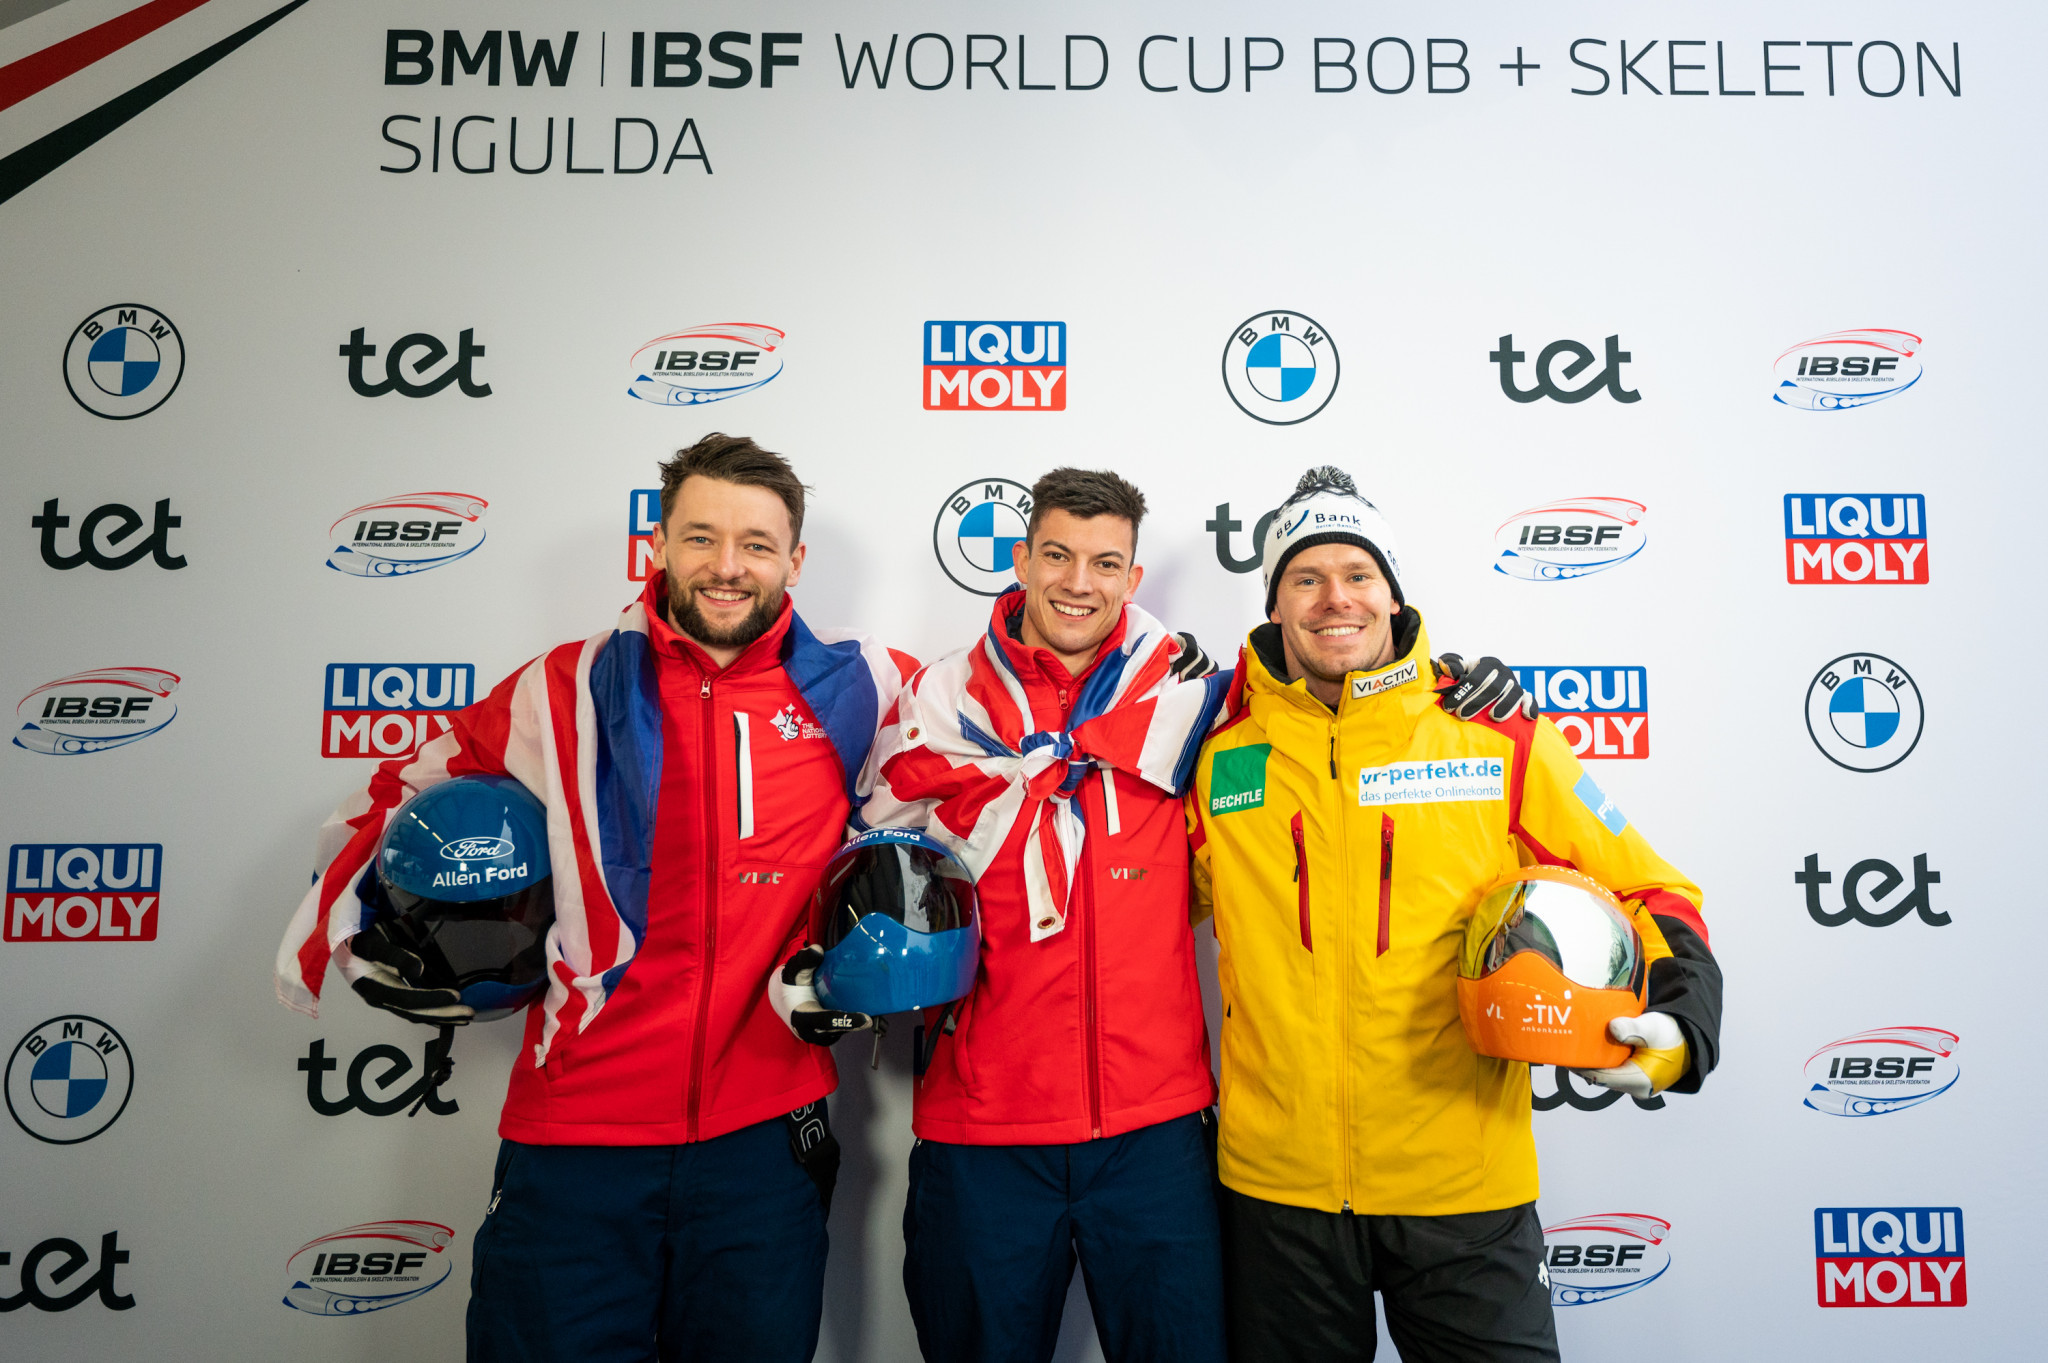 Britain's Matt Weston, centre, won his fourth consecutive World Cup race in Sigulda, but Germany's Christopher Grotheer, right, claimed the Crystal Globe ©IBSF